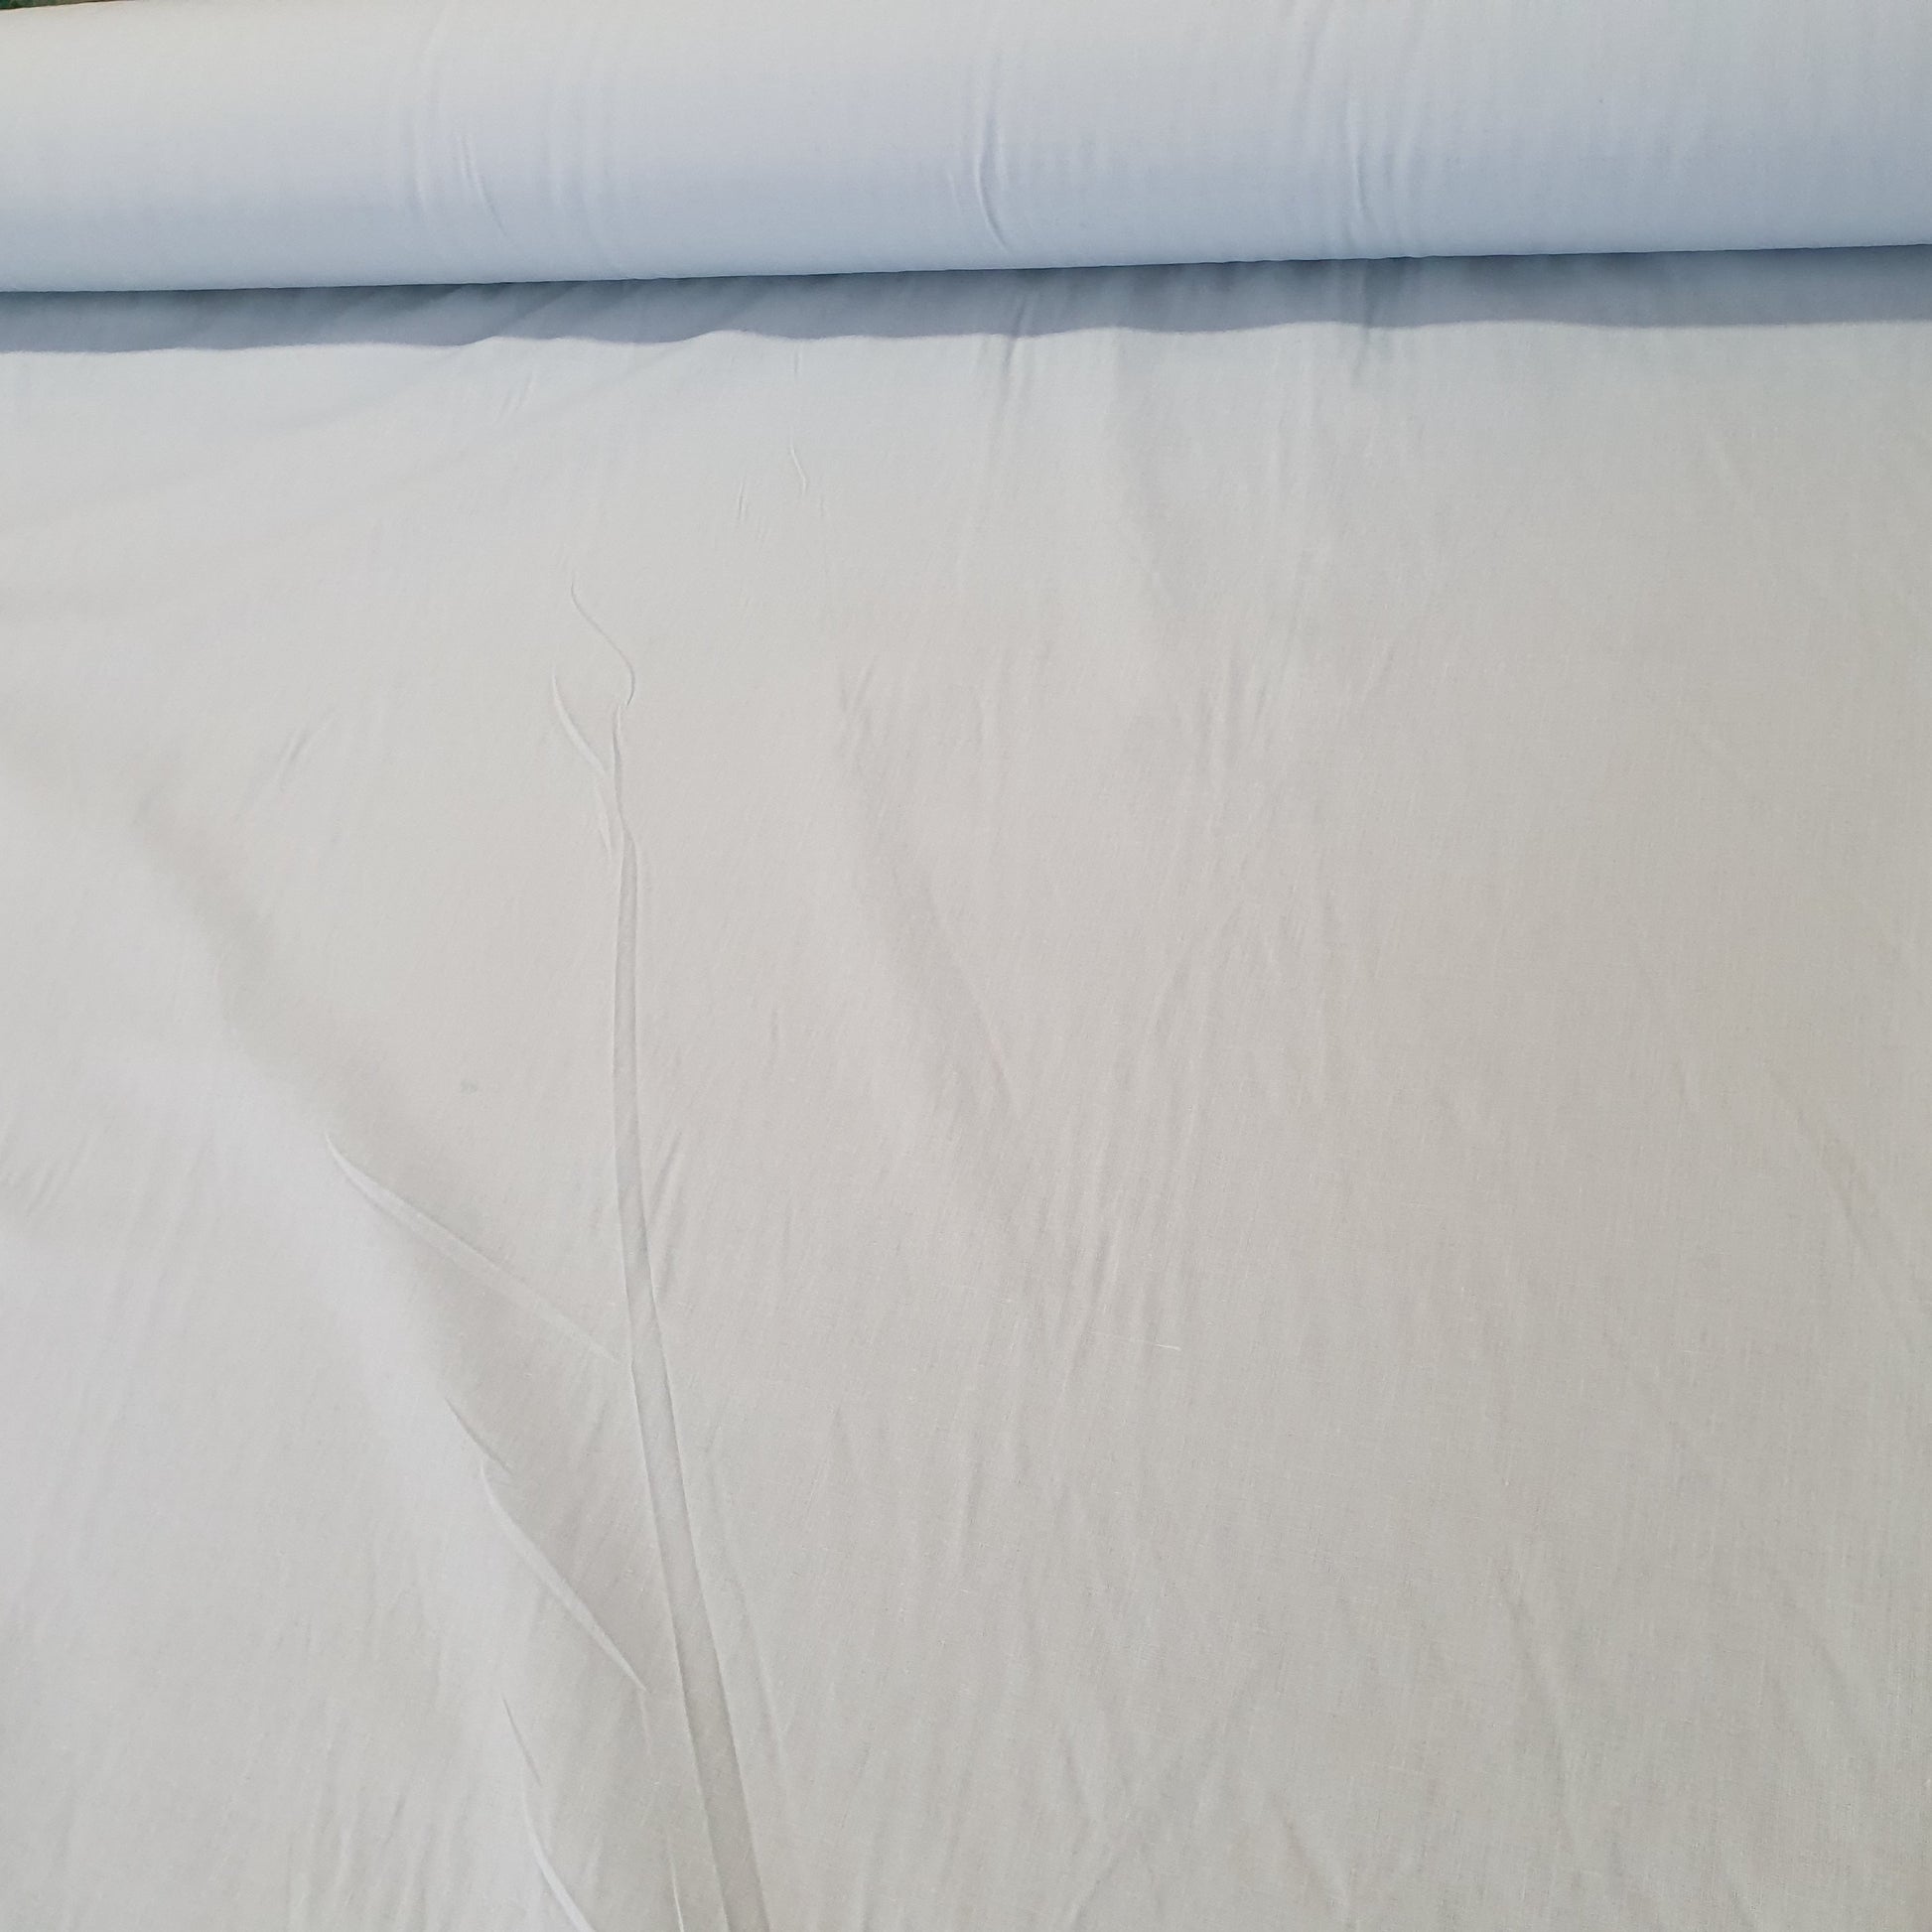 Polycotton roll in duck egg blue